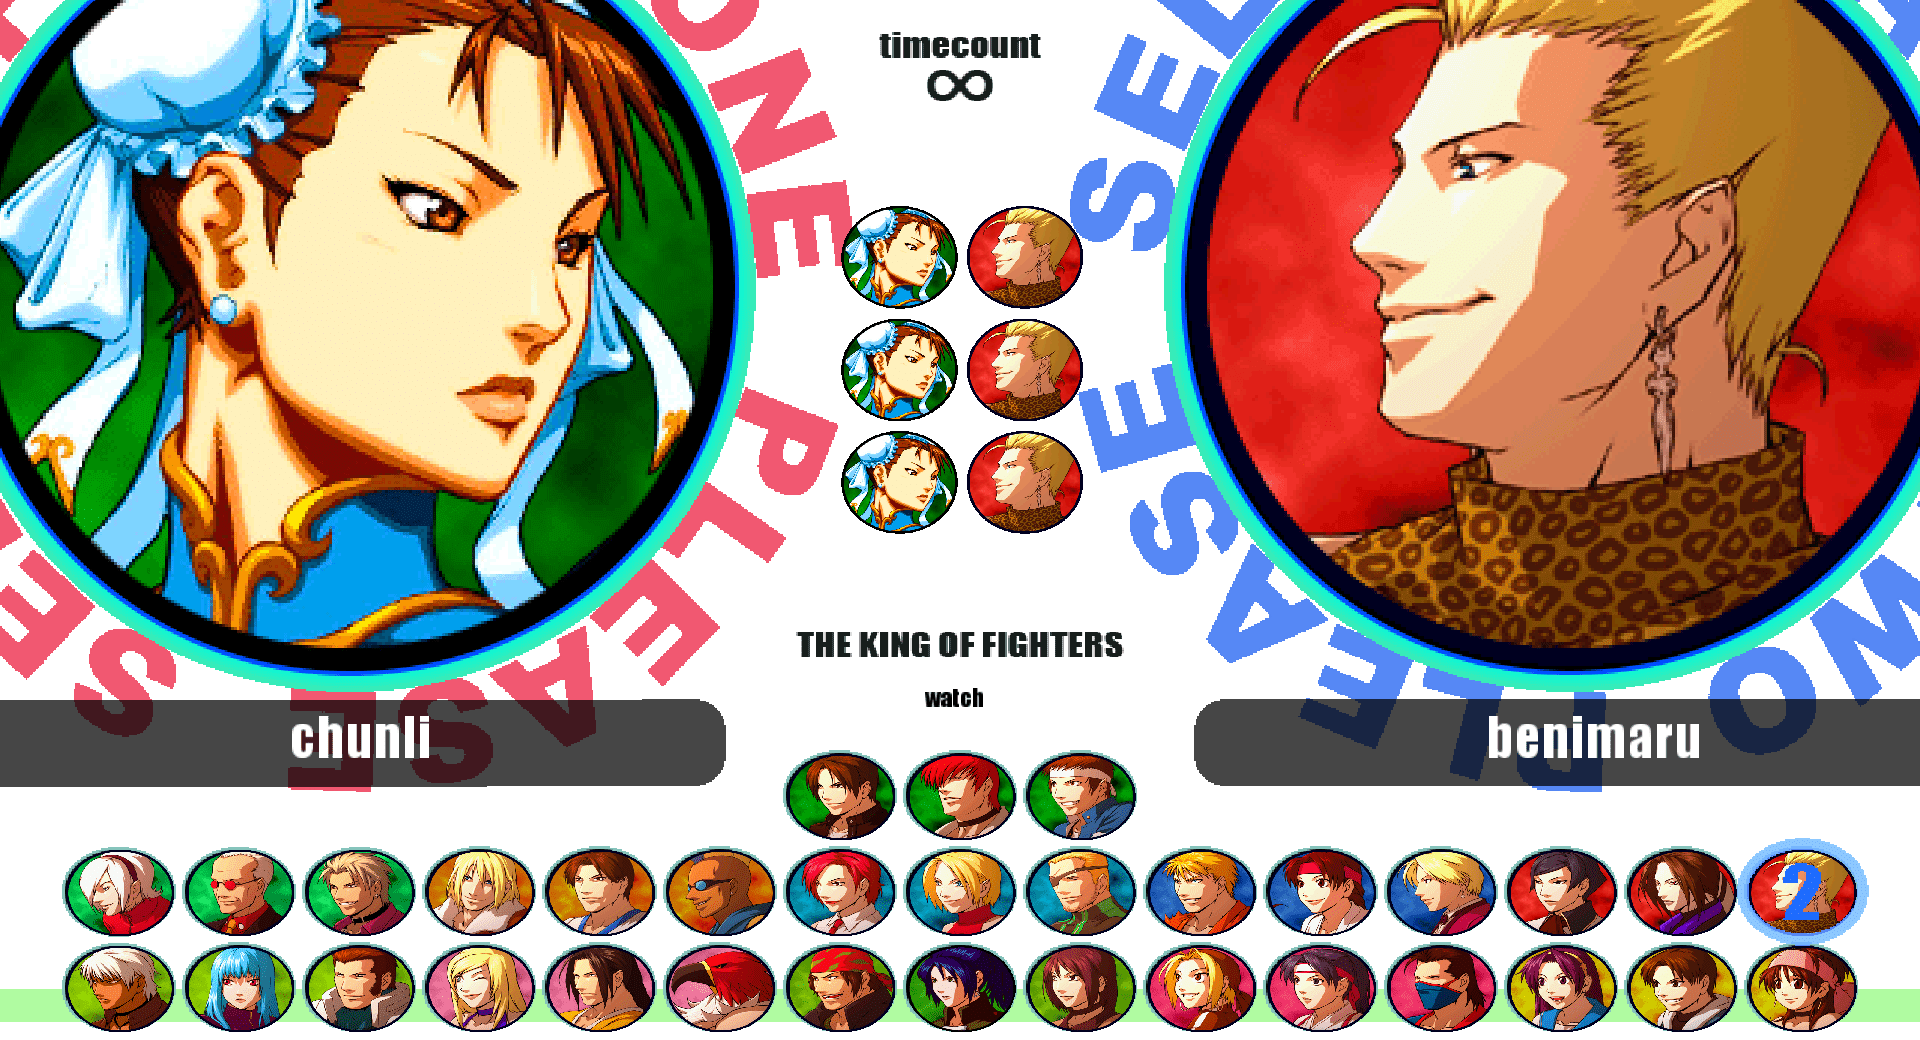 ⭐👉The King of Fighters XI IKEMEN-GO 1.1.7v